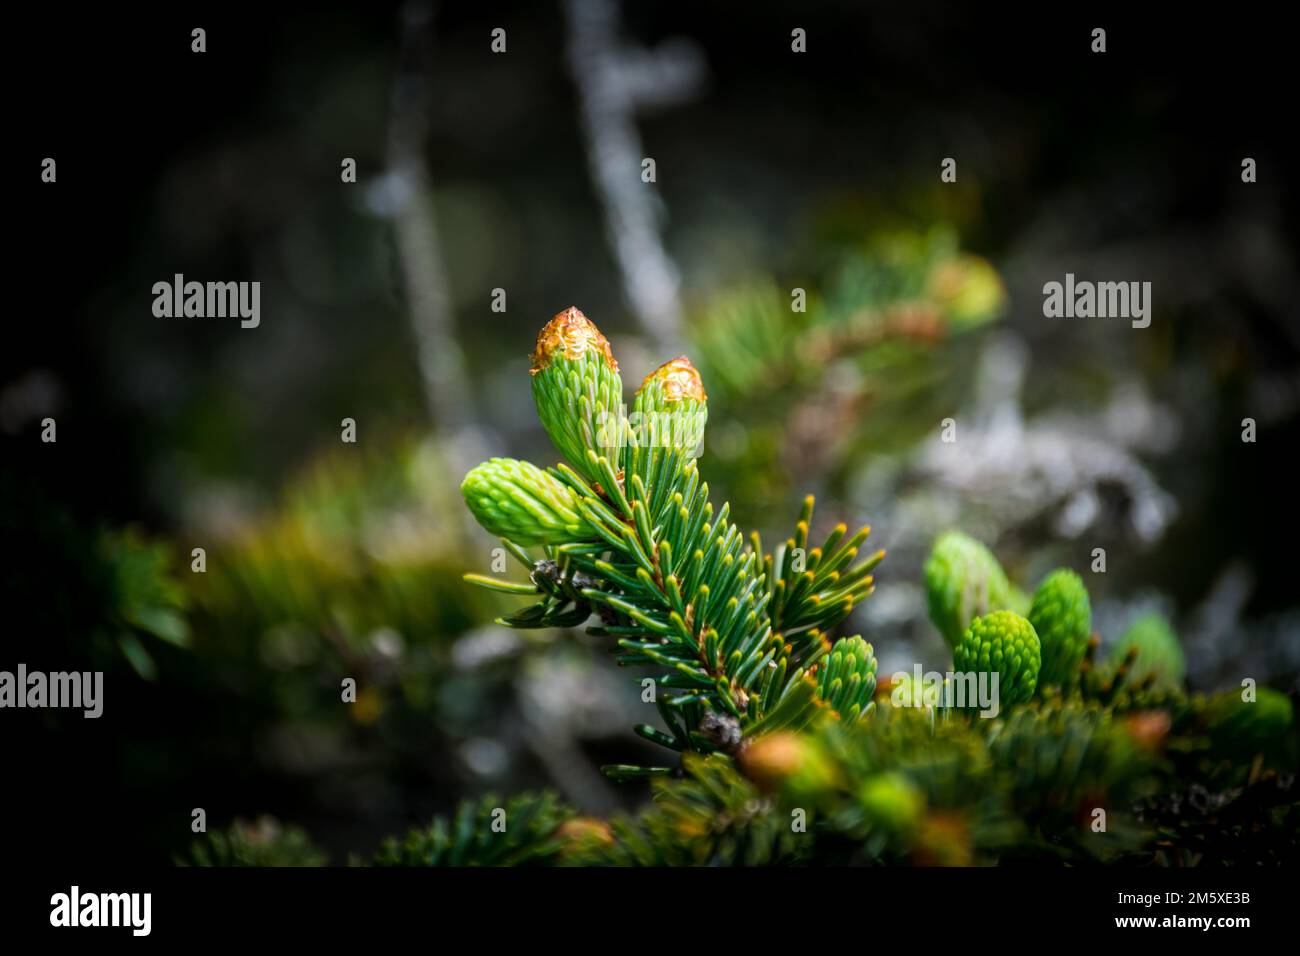 A selective focus of abies firma on a blurry background Stock Photo